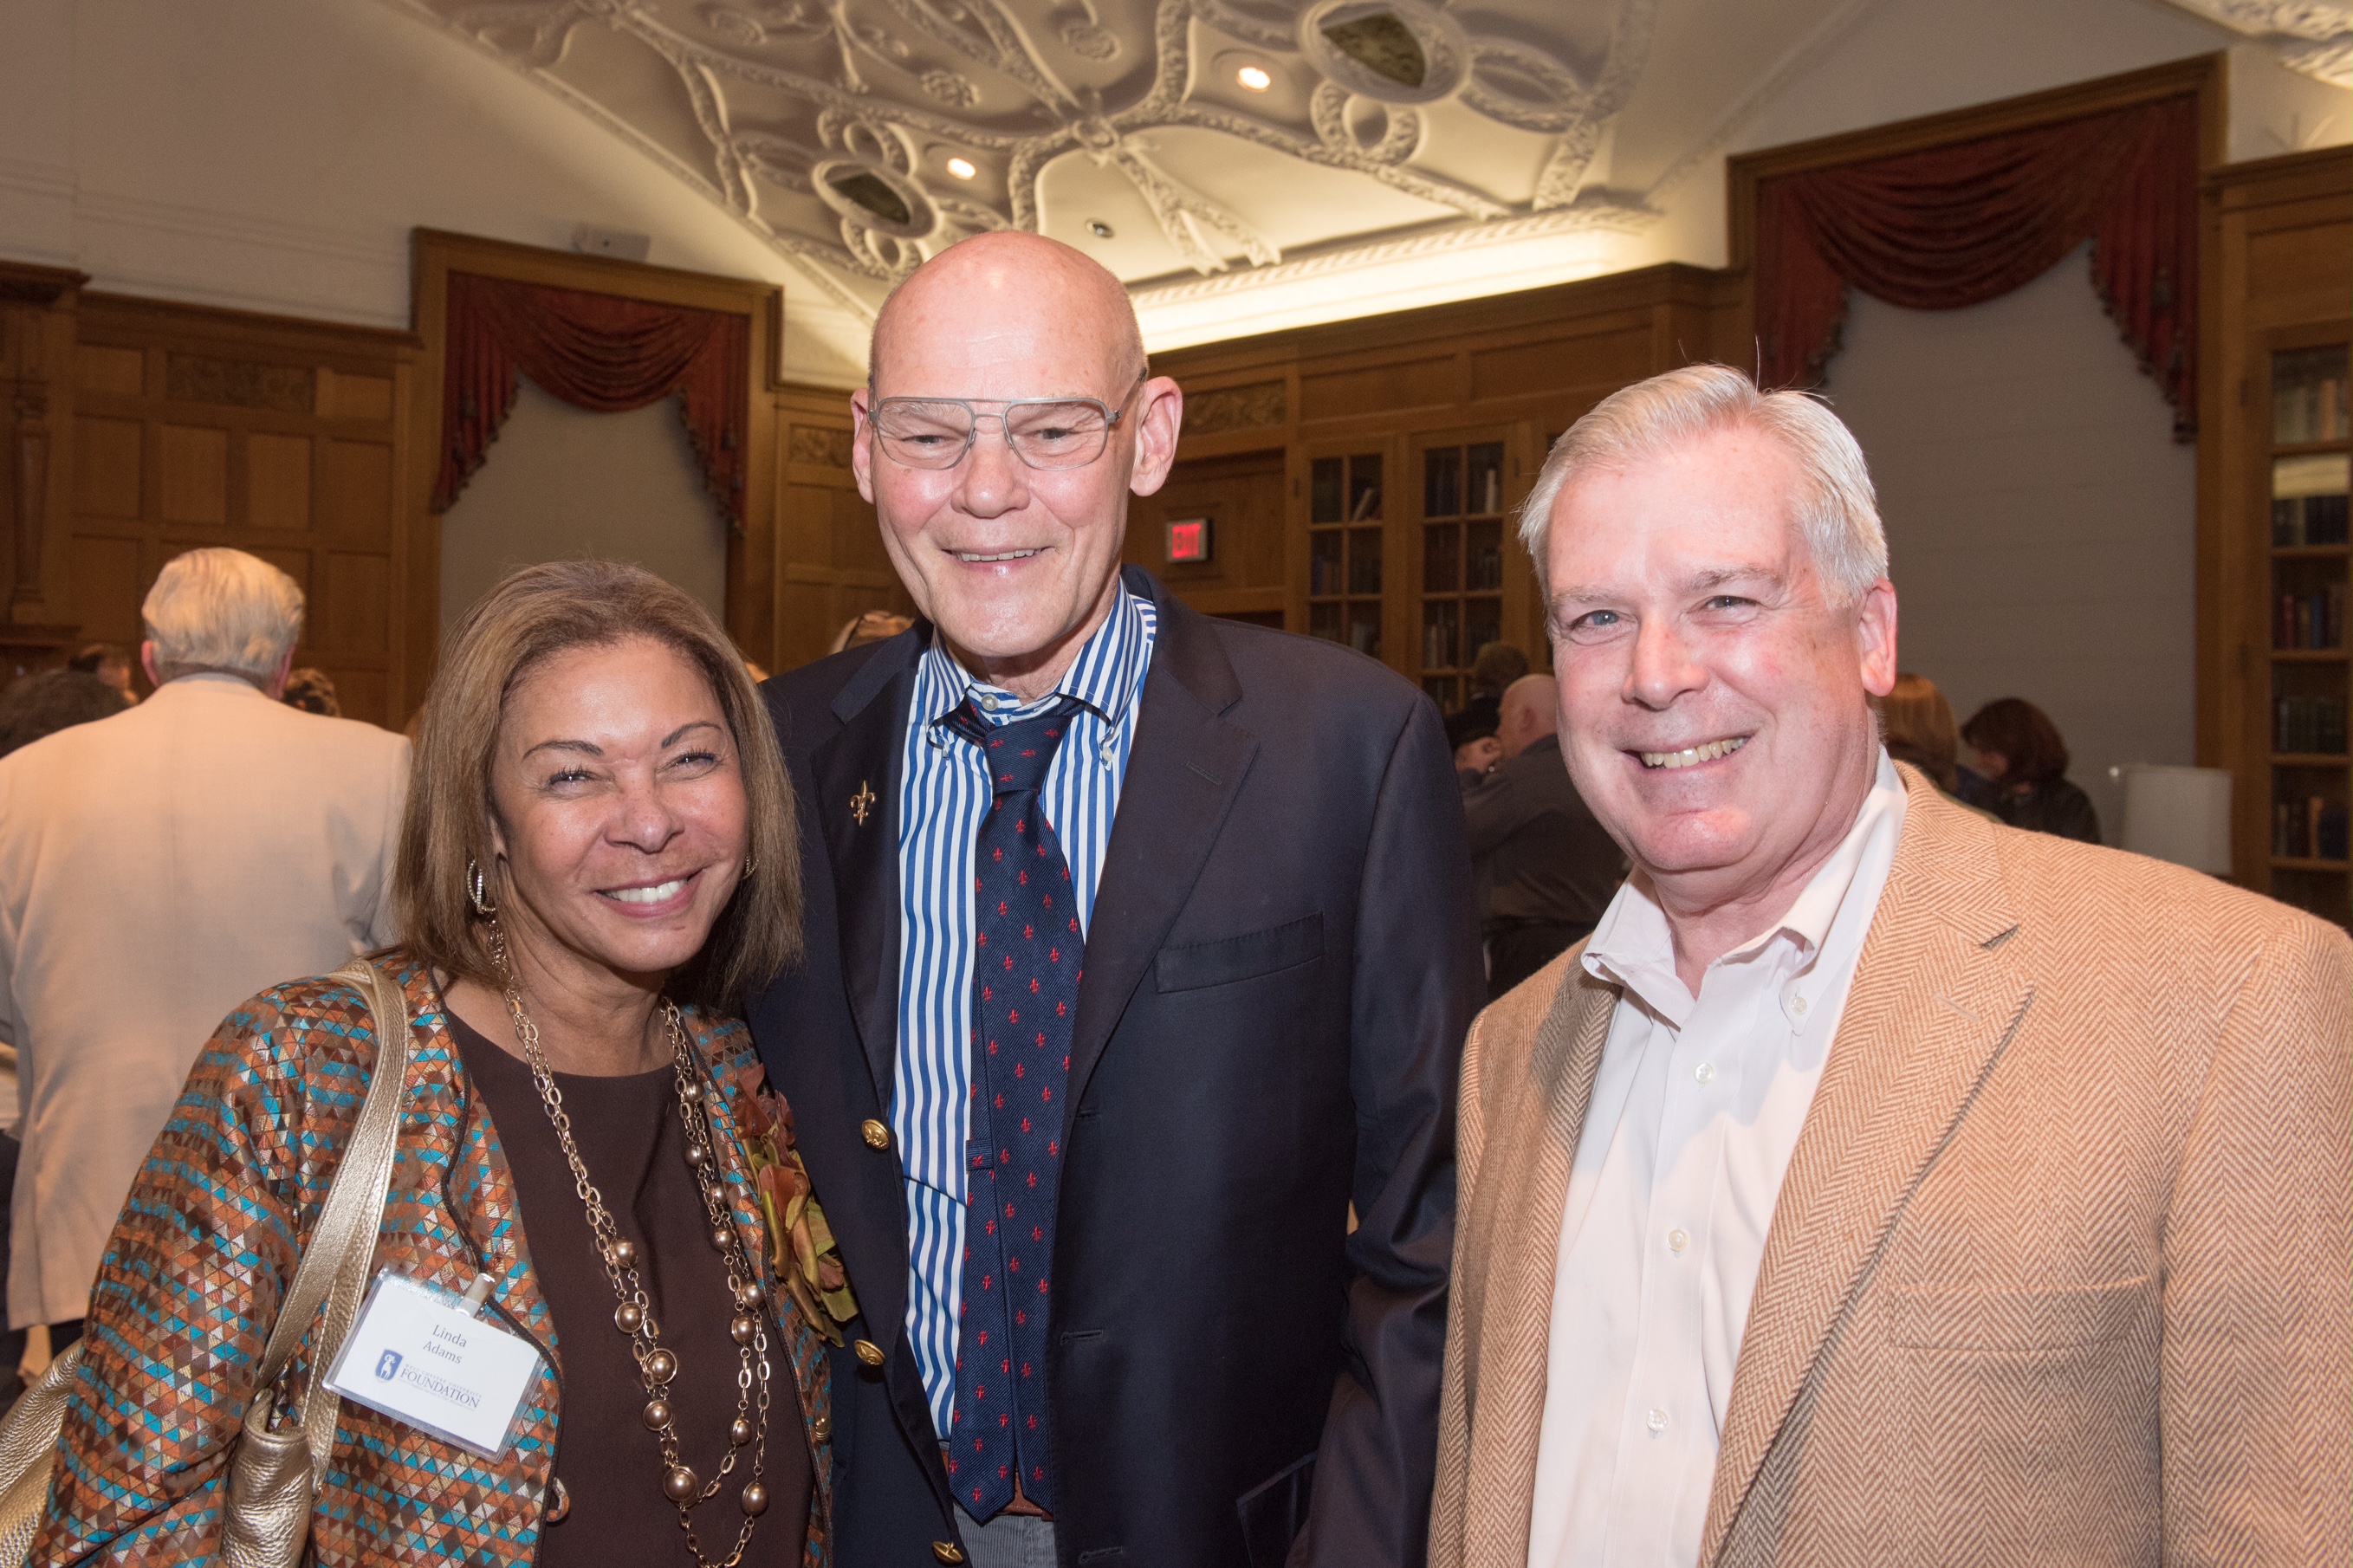 James Carville visits West Chester University